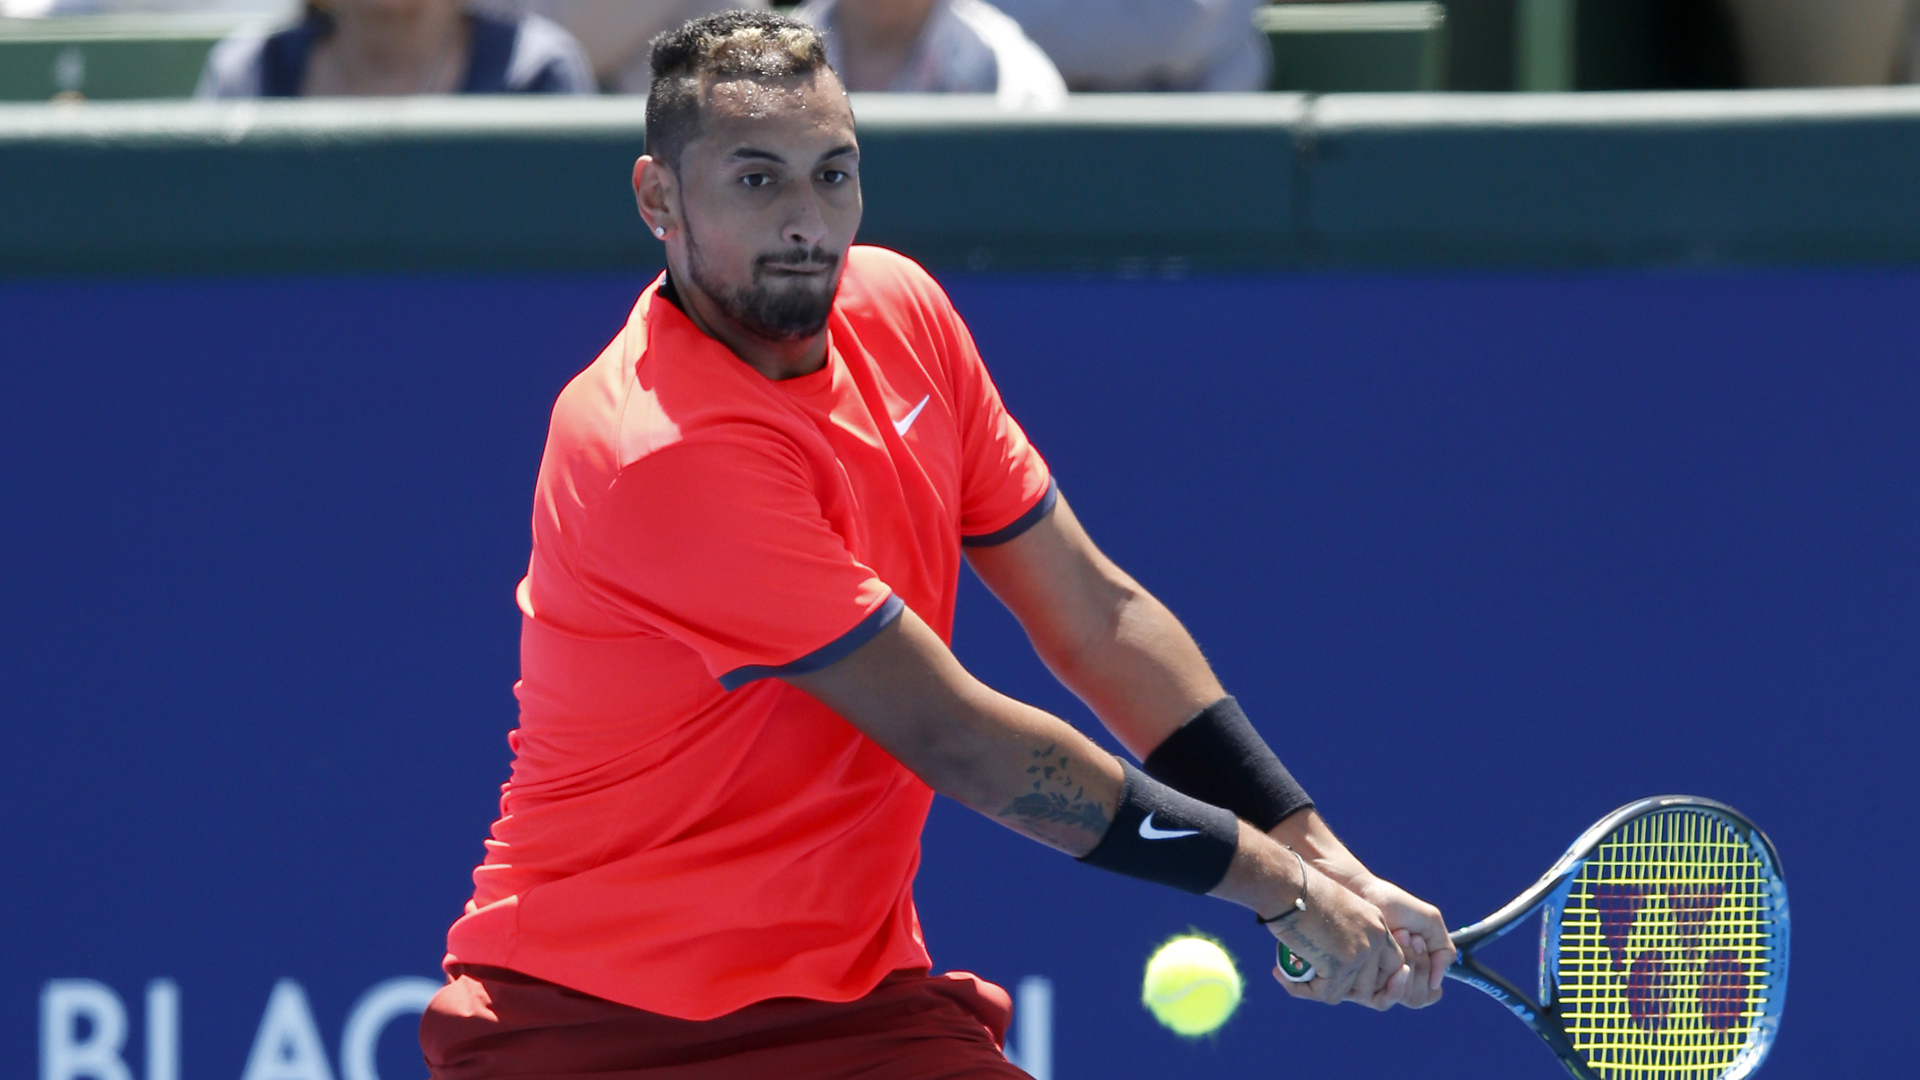 A former world number 13, Nick Kyrgios feels the top 10 is a realistic target in 2019.